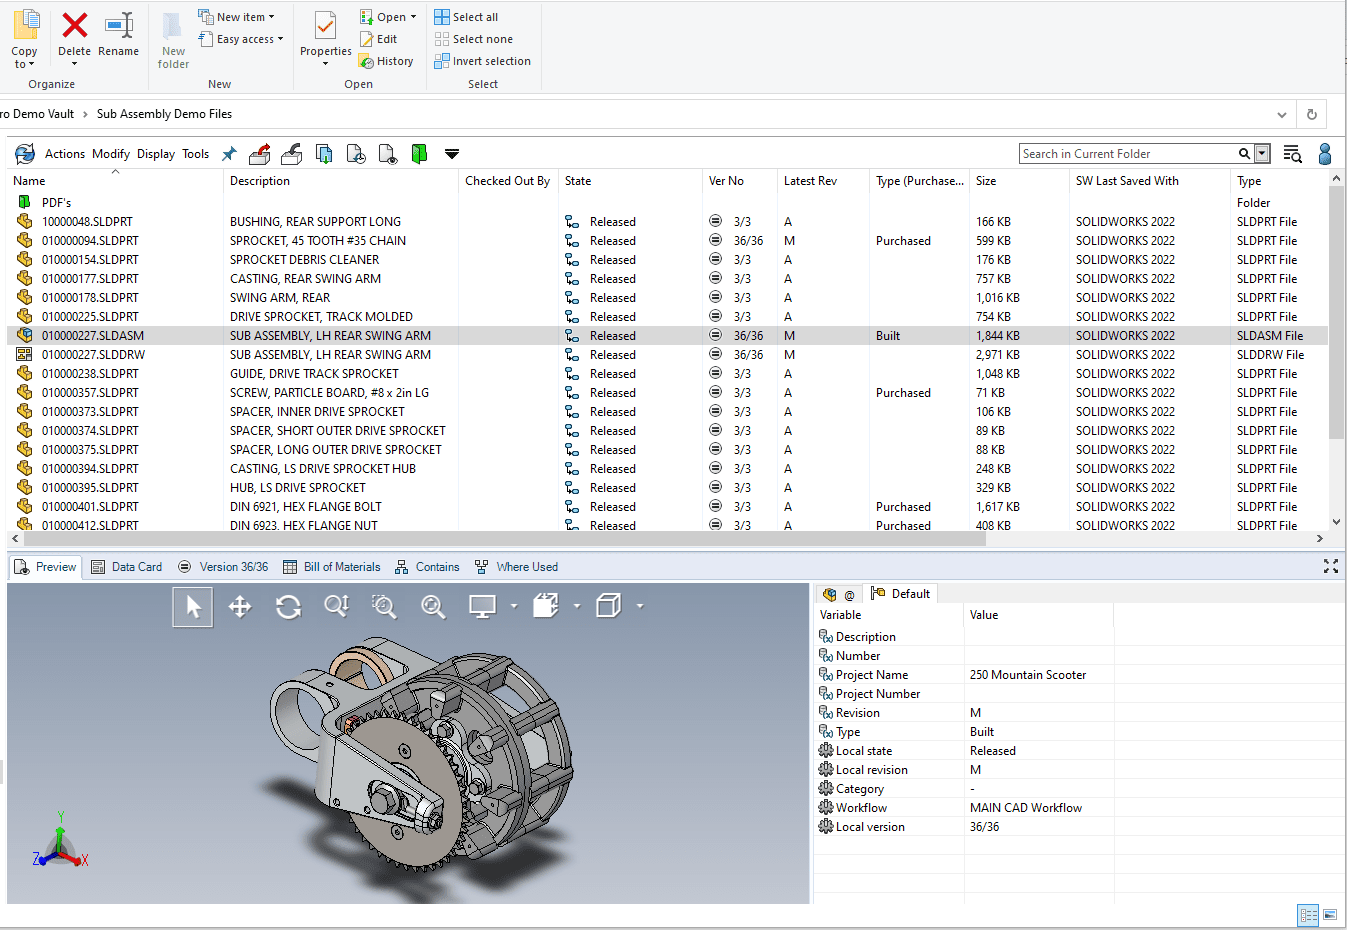 Many users see improvements for their large assemblies when working inside a data management tool like SOLIDWORKS PDM.